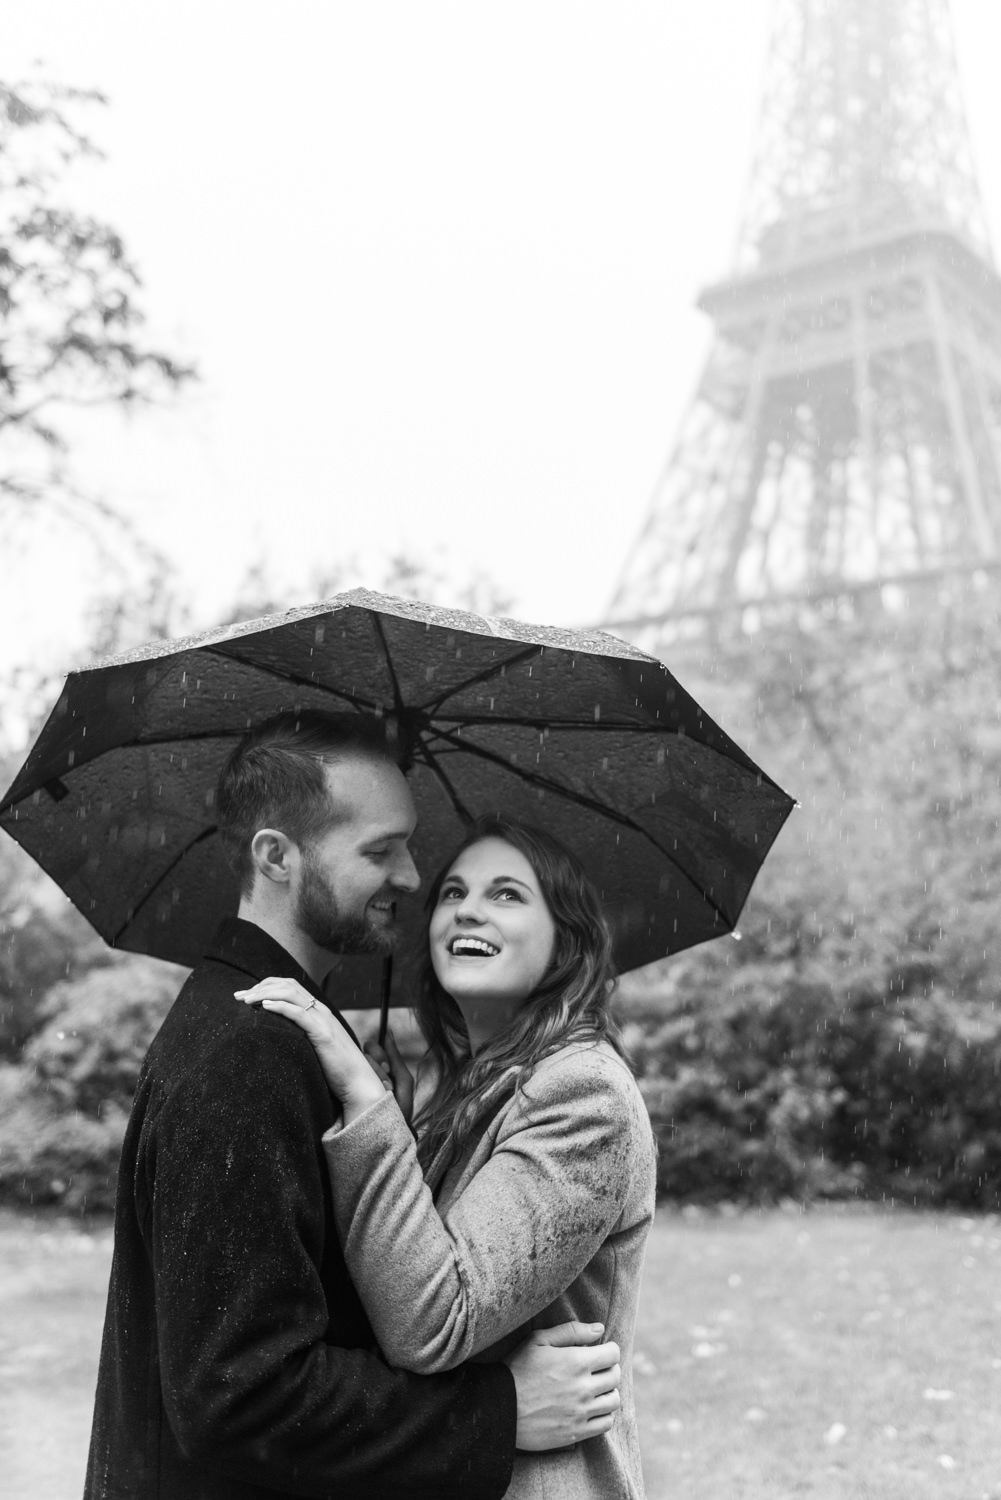 American couple photographed on the foot of the Eiffel Tower, by an English speaking couple shoot photographer in Paris